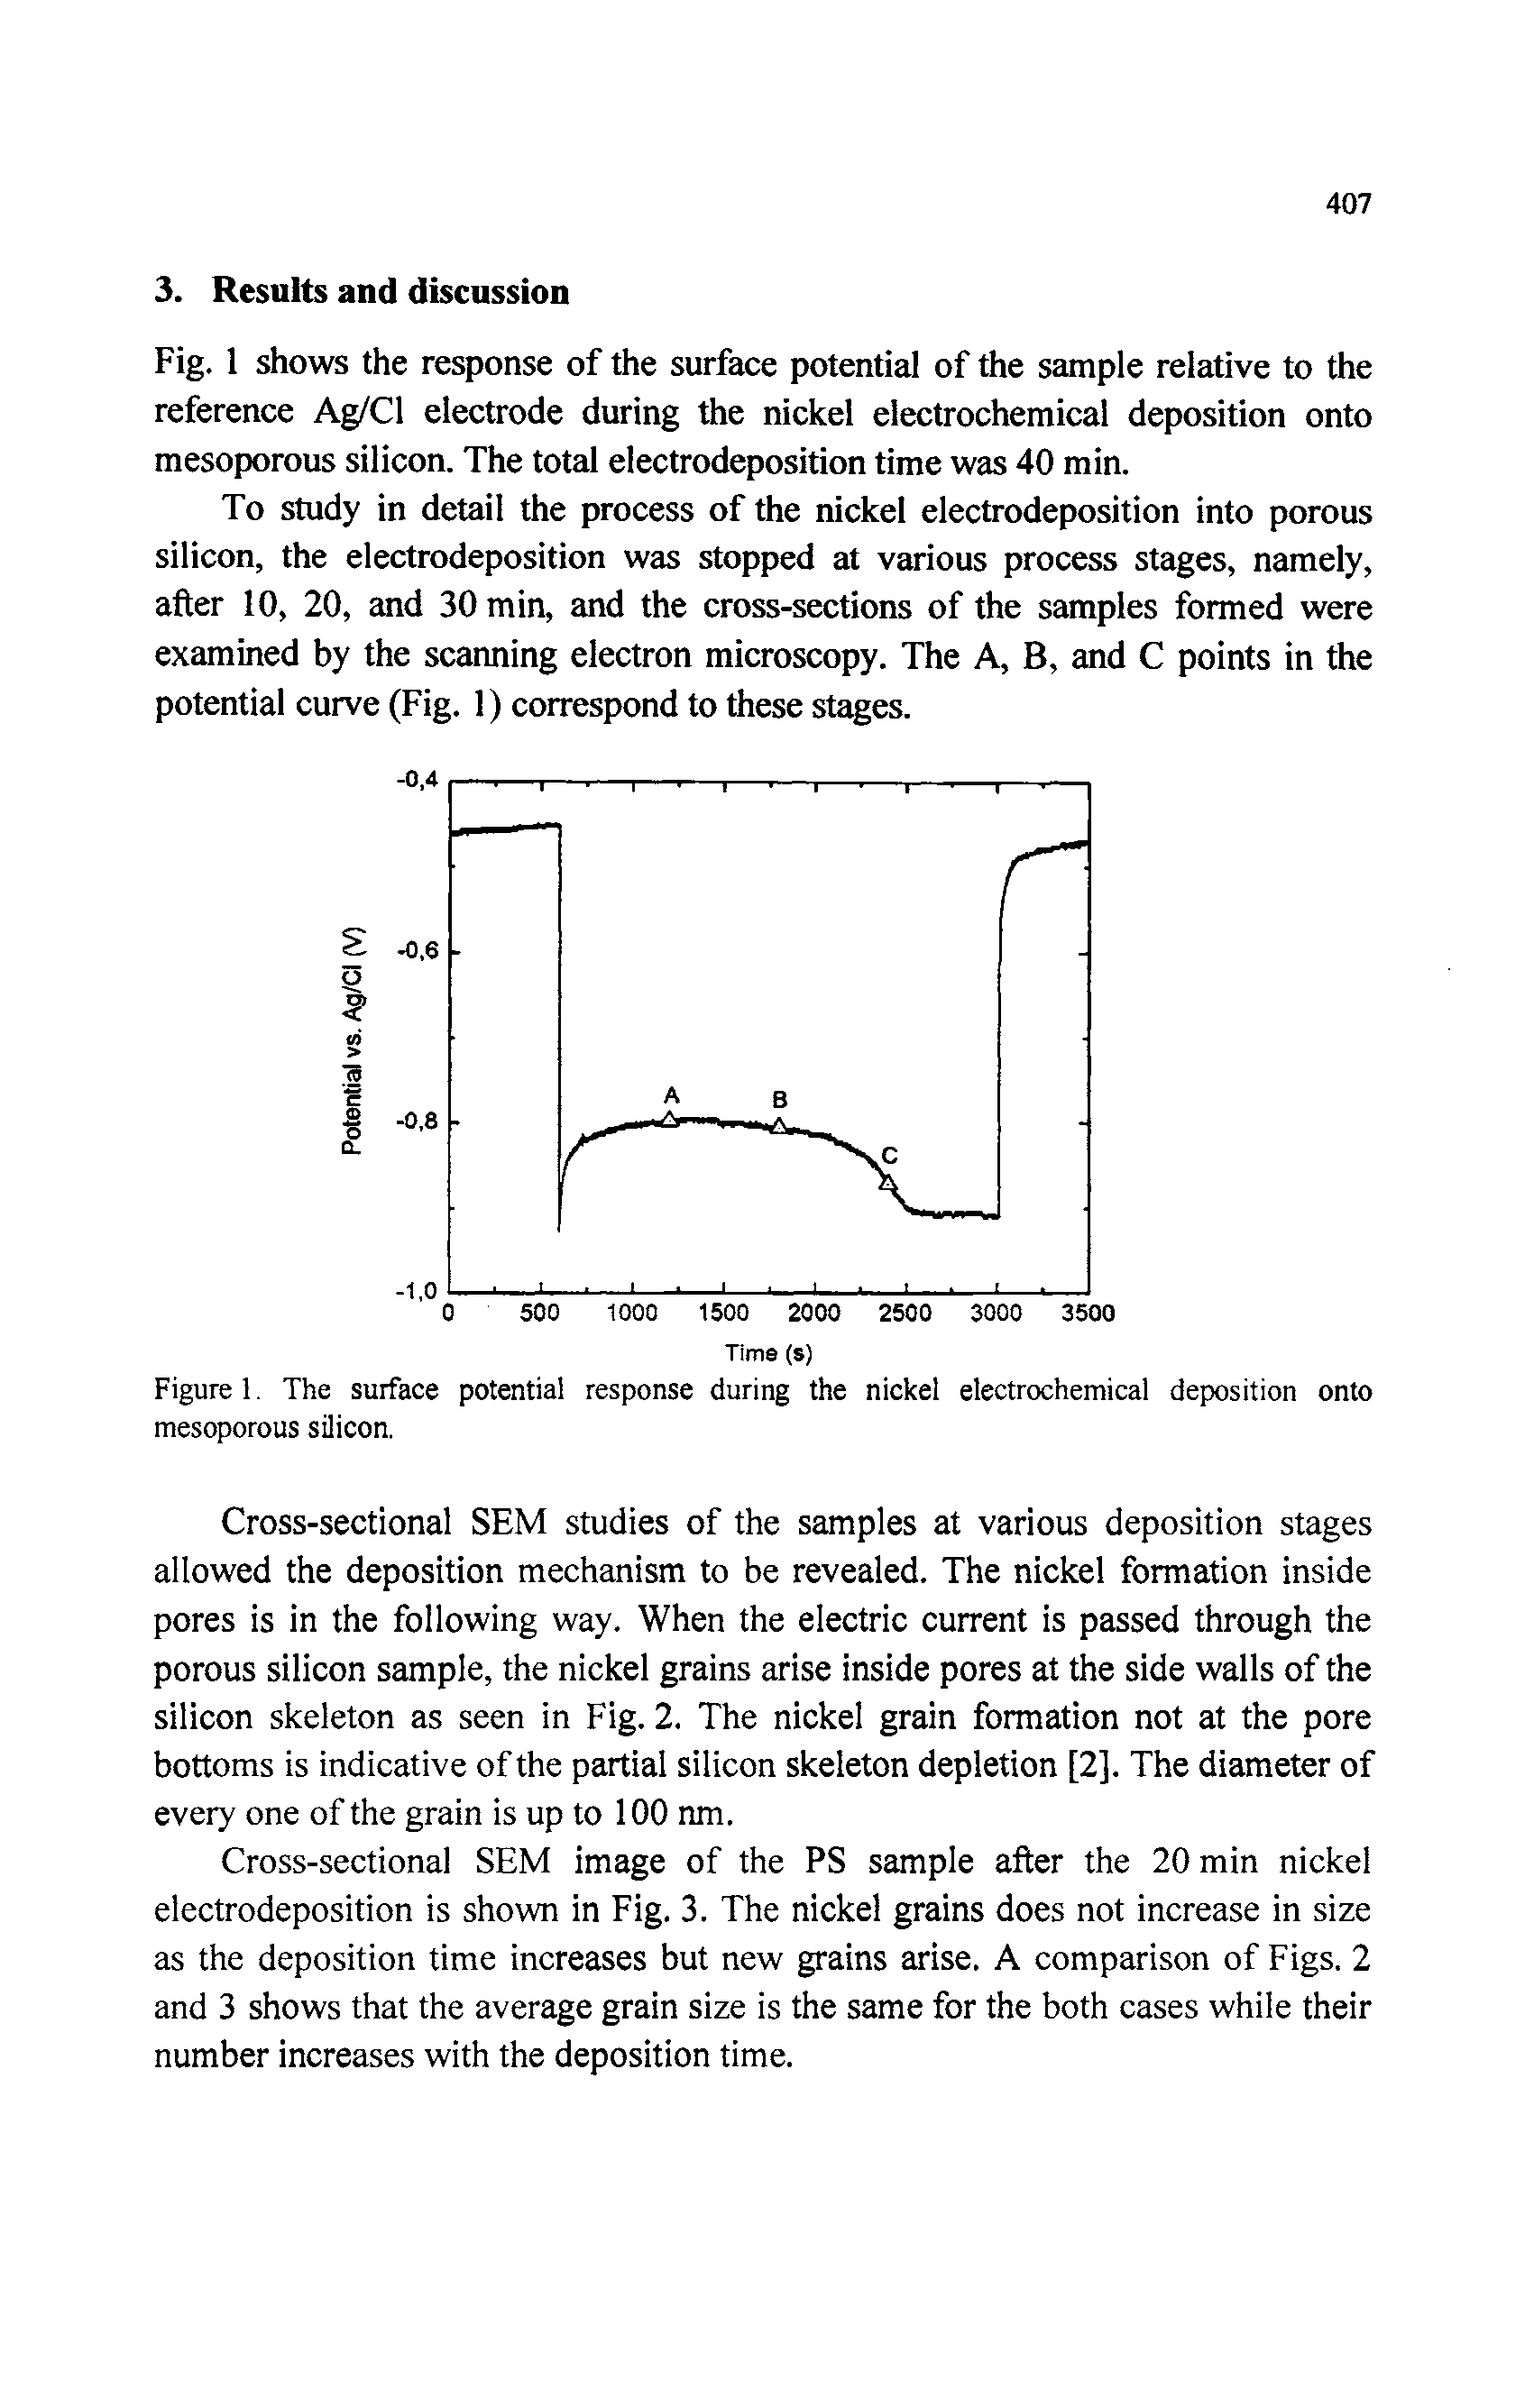 Figure 1. The surface potential response during the nickel electrochemical deposition onto mesoporous silicon.